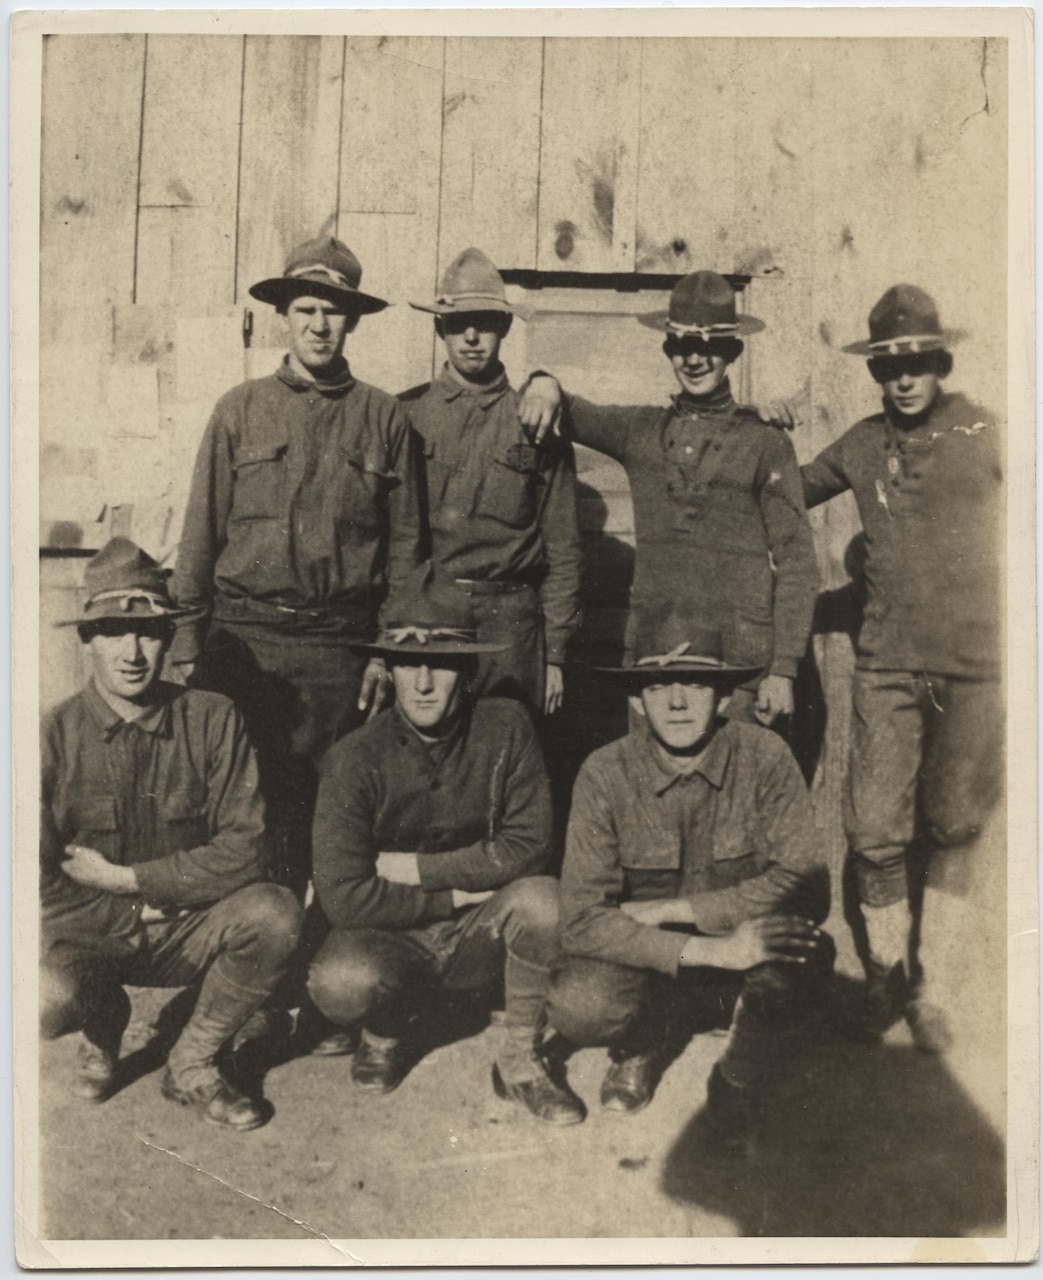 Doughboys of Company G, 137th Infantry Regiment, 35th Division pose in front of a barracks in France in 1918. The soldier in the front row – Pvt. John Frary – was killed in the Meuse-Argonne campaign. Photo courtesy of the National World War I Museum and Memorial